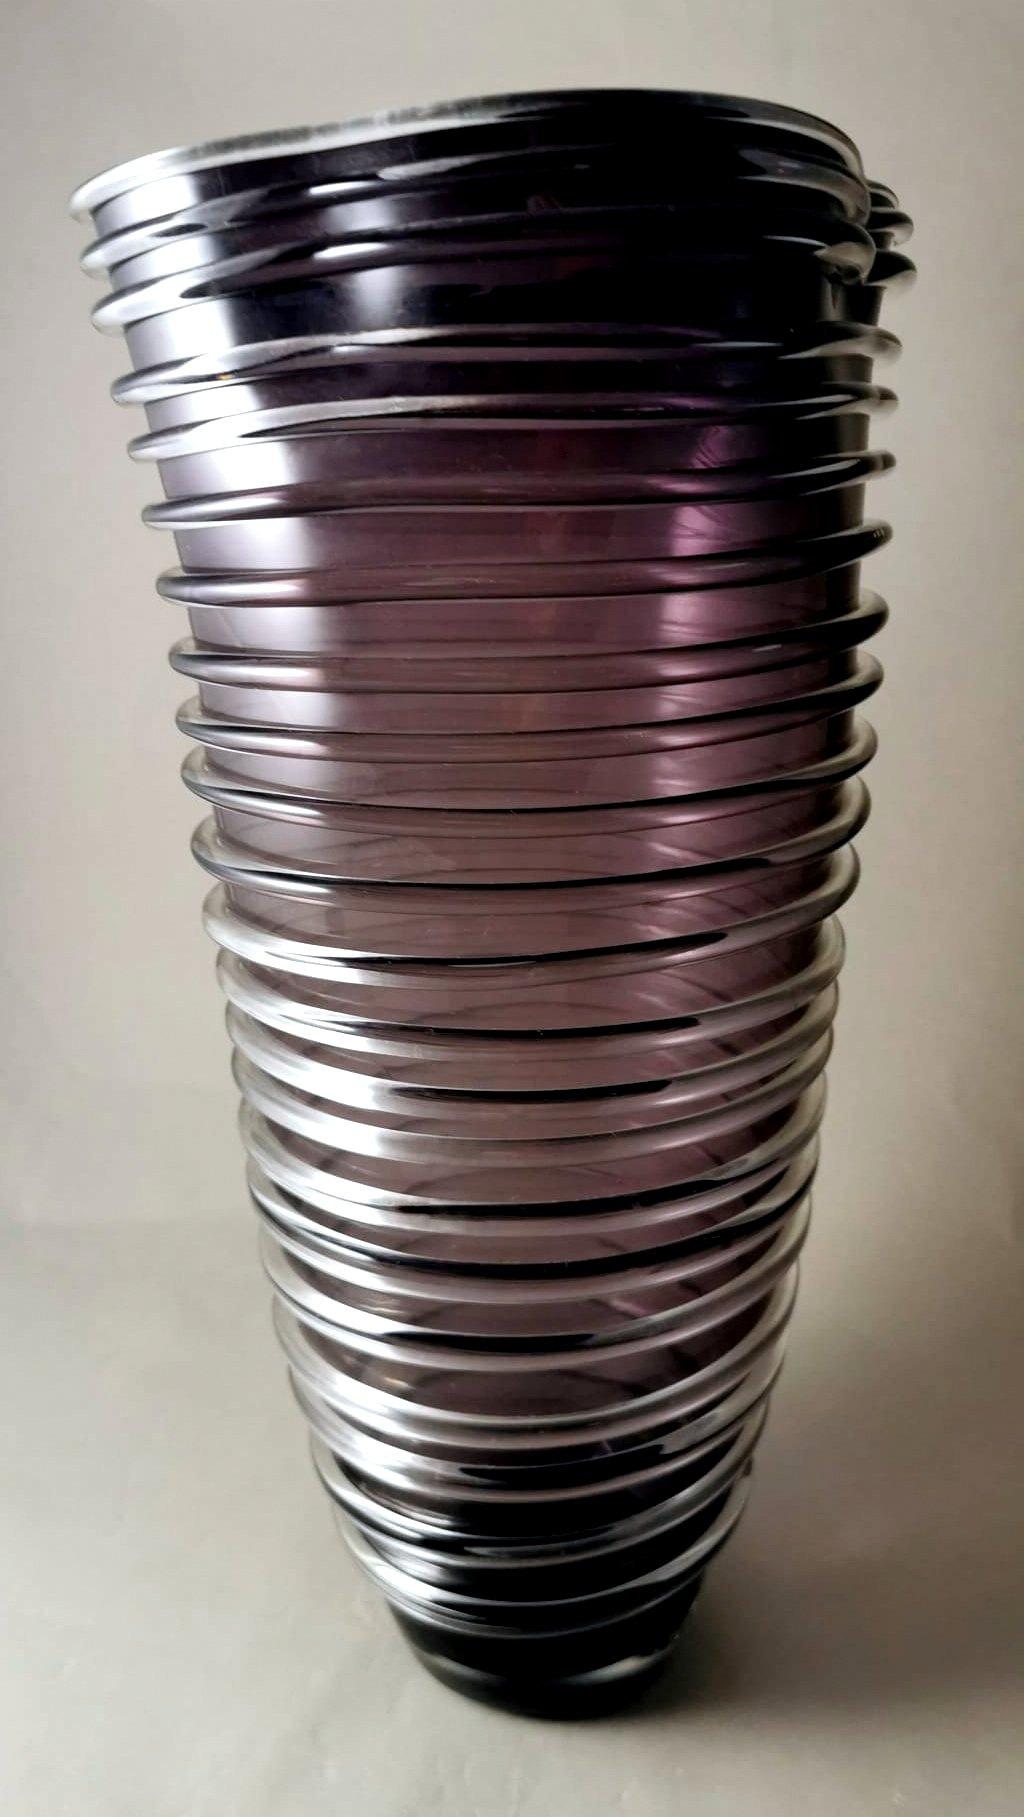 We kindly suggest that you read the whole description, as with it we try to give you detailed technical and historical information to guarantee the authenticity of our objects.
Original and unique Murano vase made of violet-colored blown glass with